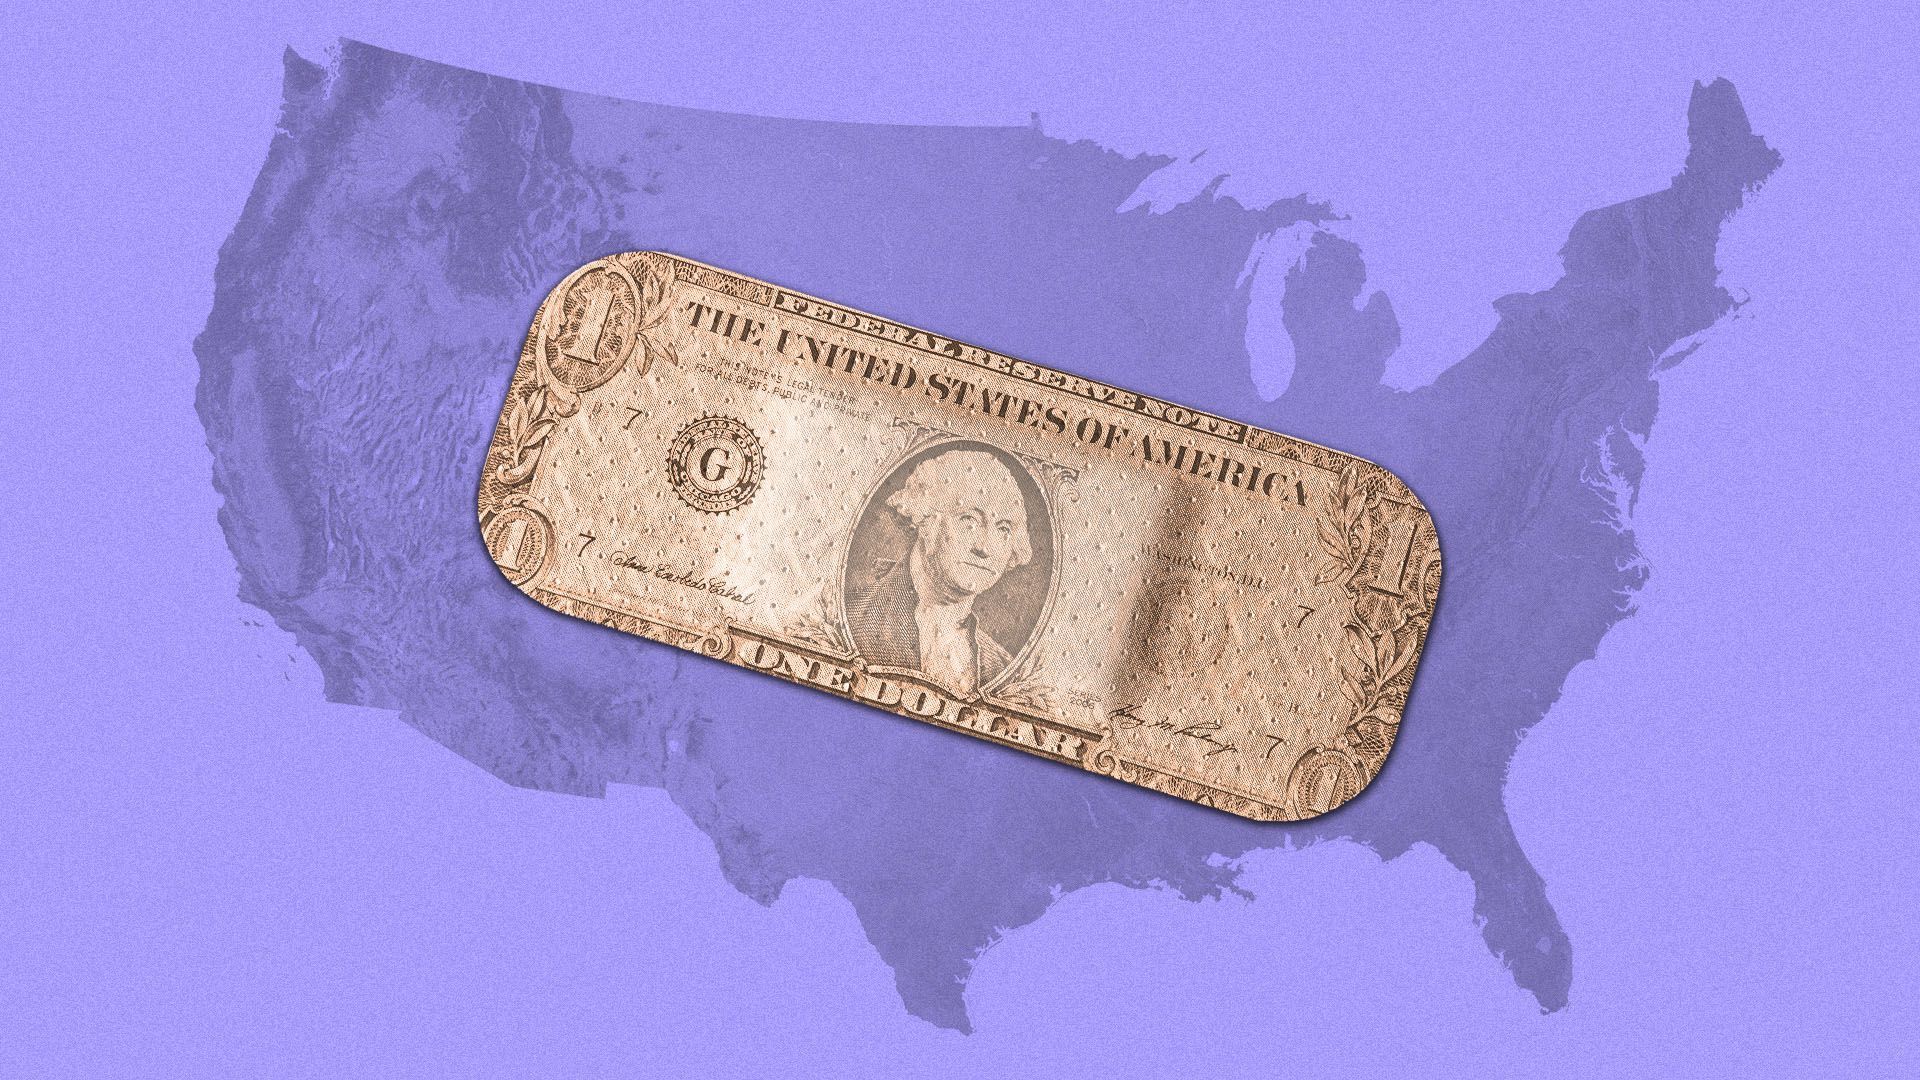 Illustration of the United States with a bandaid with a dollar bill overlay on it